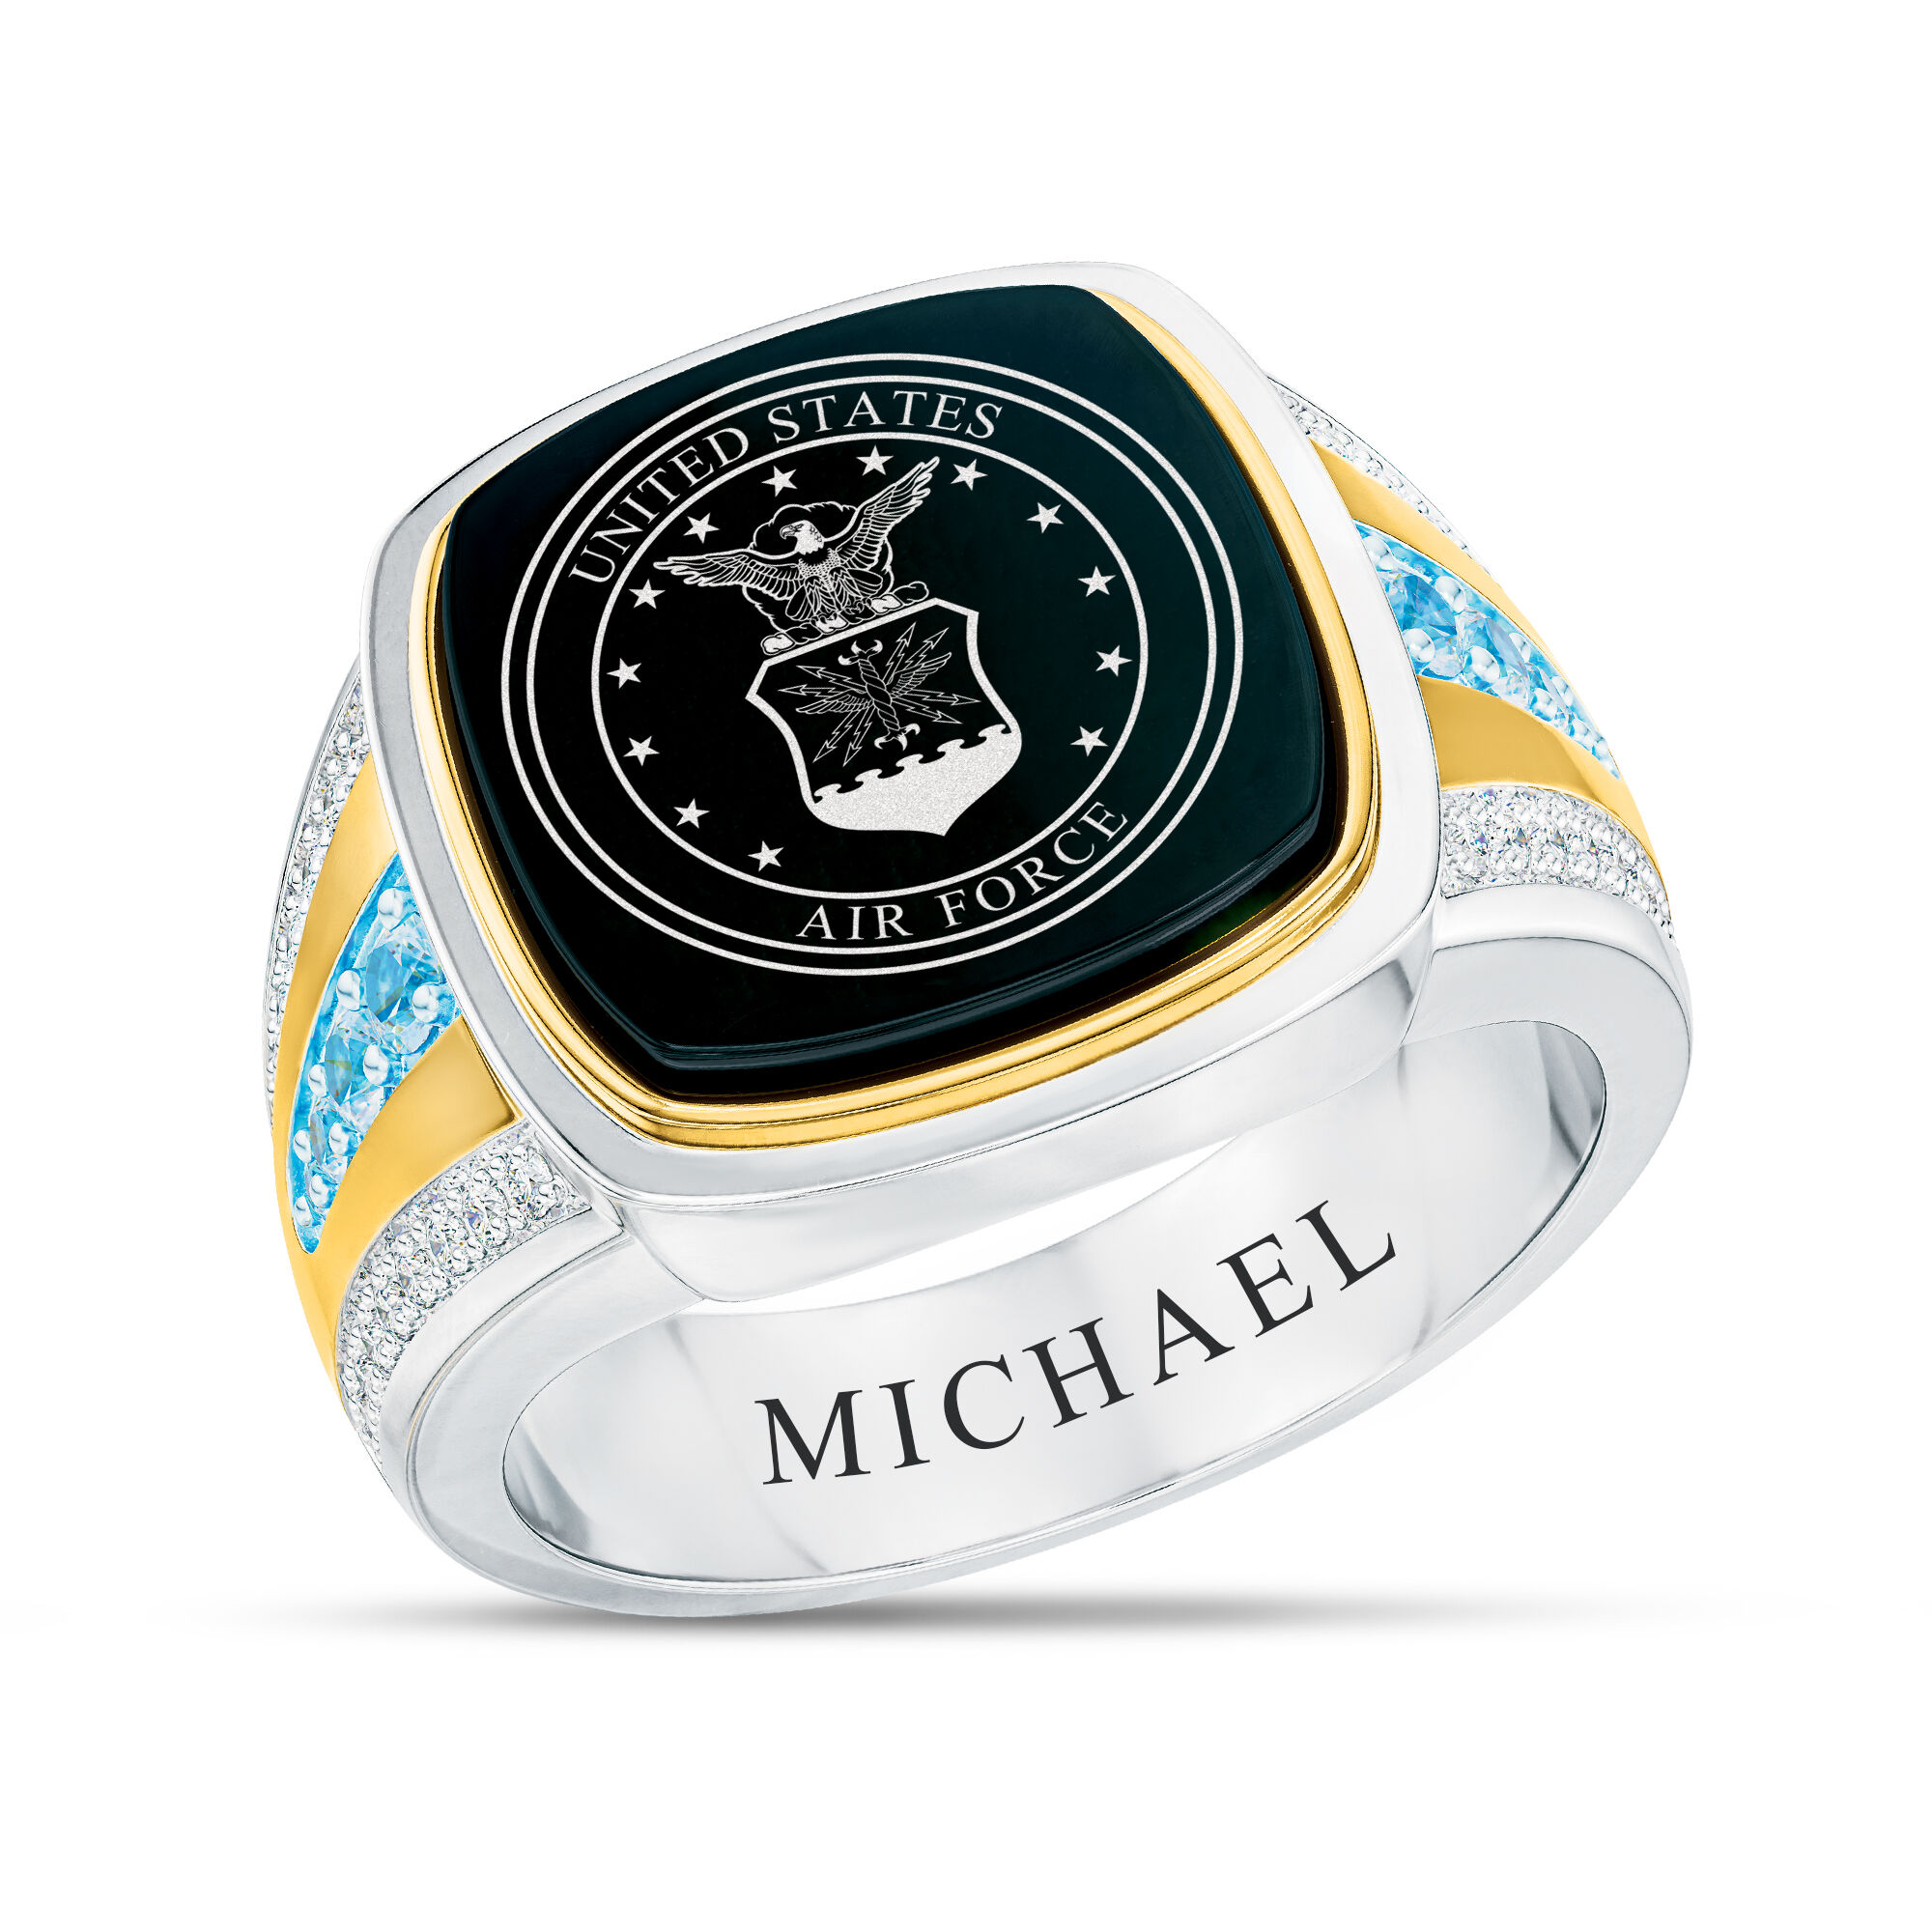 The US Air Force Birthstone Ring 10347 0043 c march